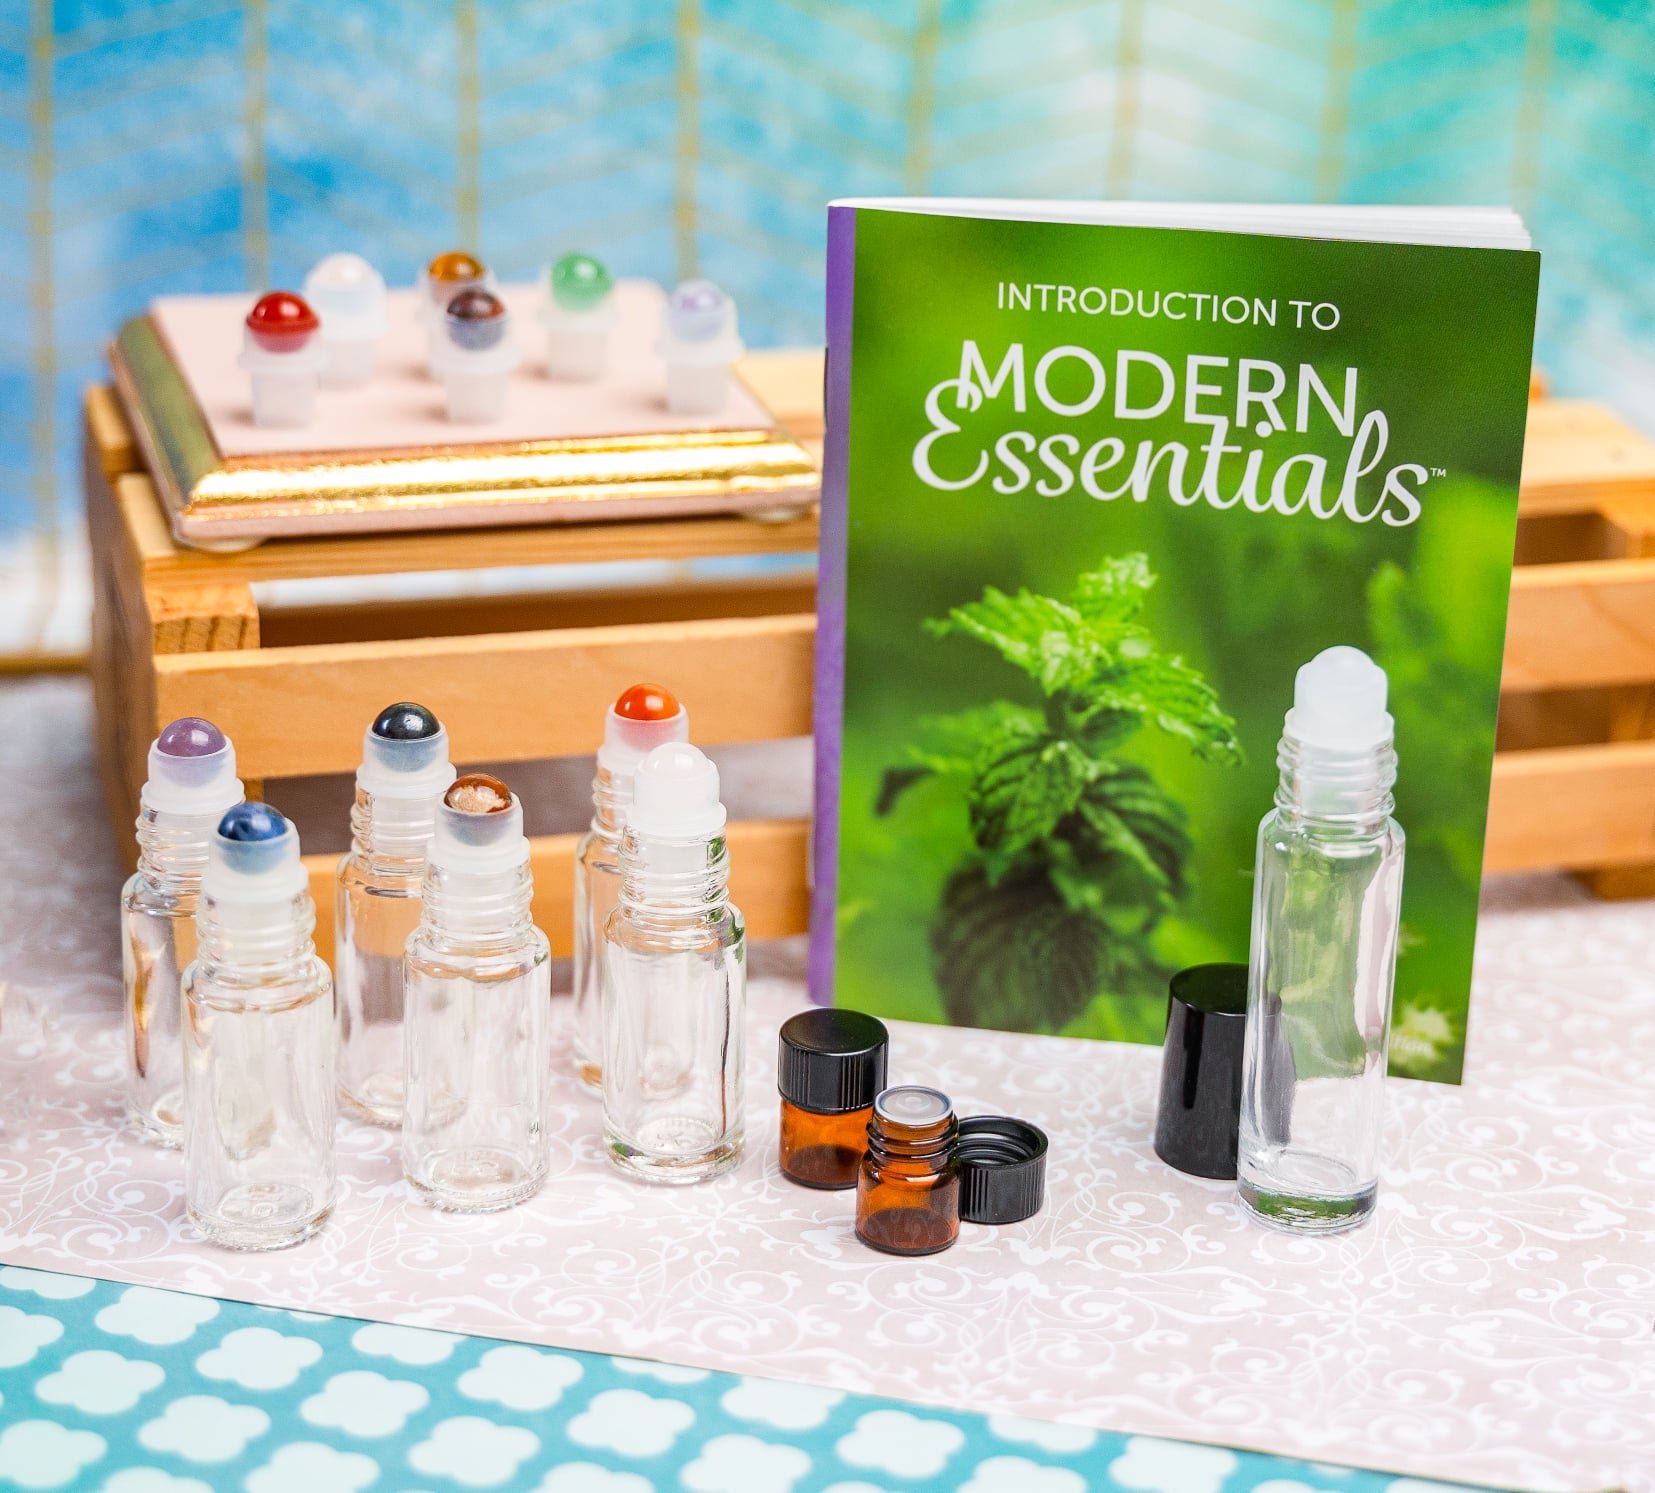 An "Introduction to Modern Essentials" booklet (11th Edition) with gemstone roller bottles and sample vials.